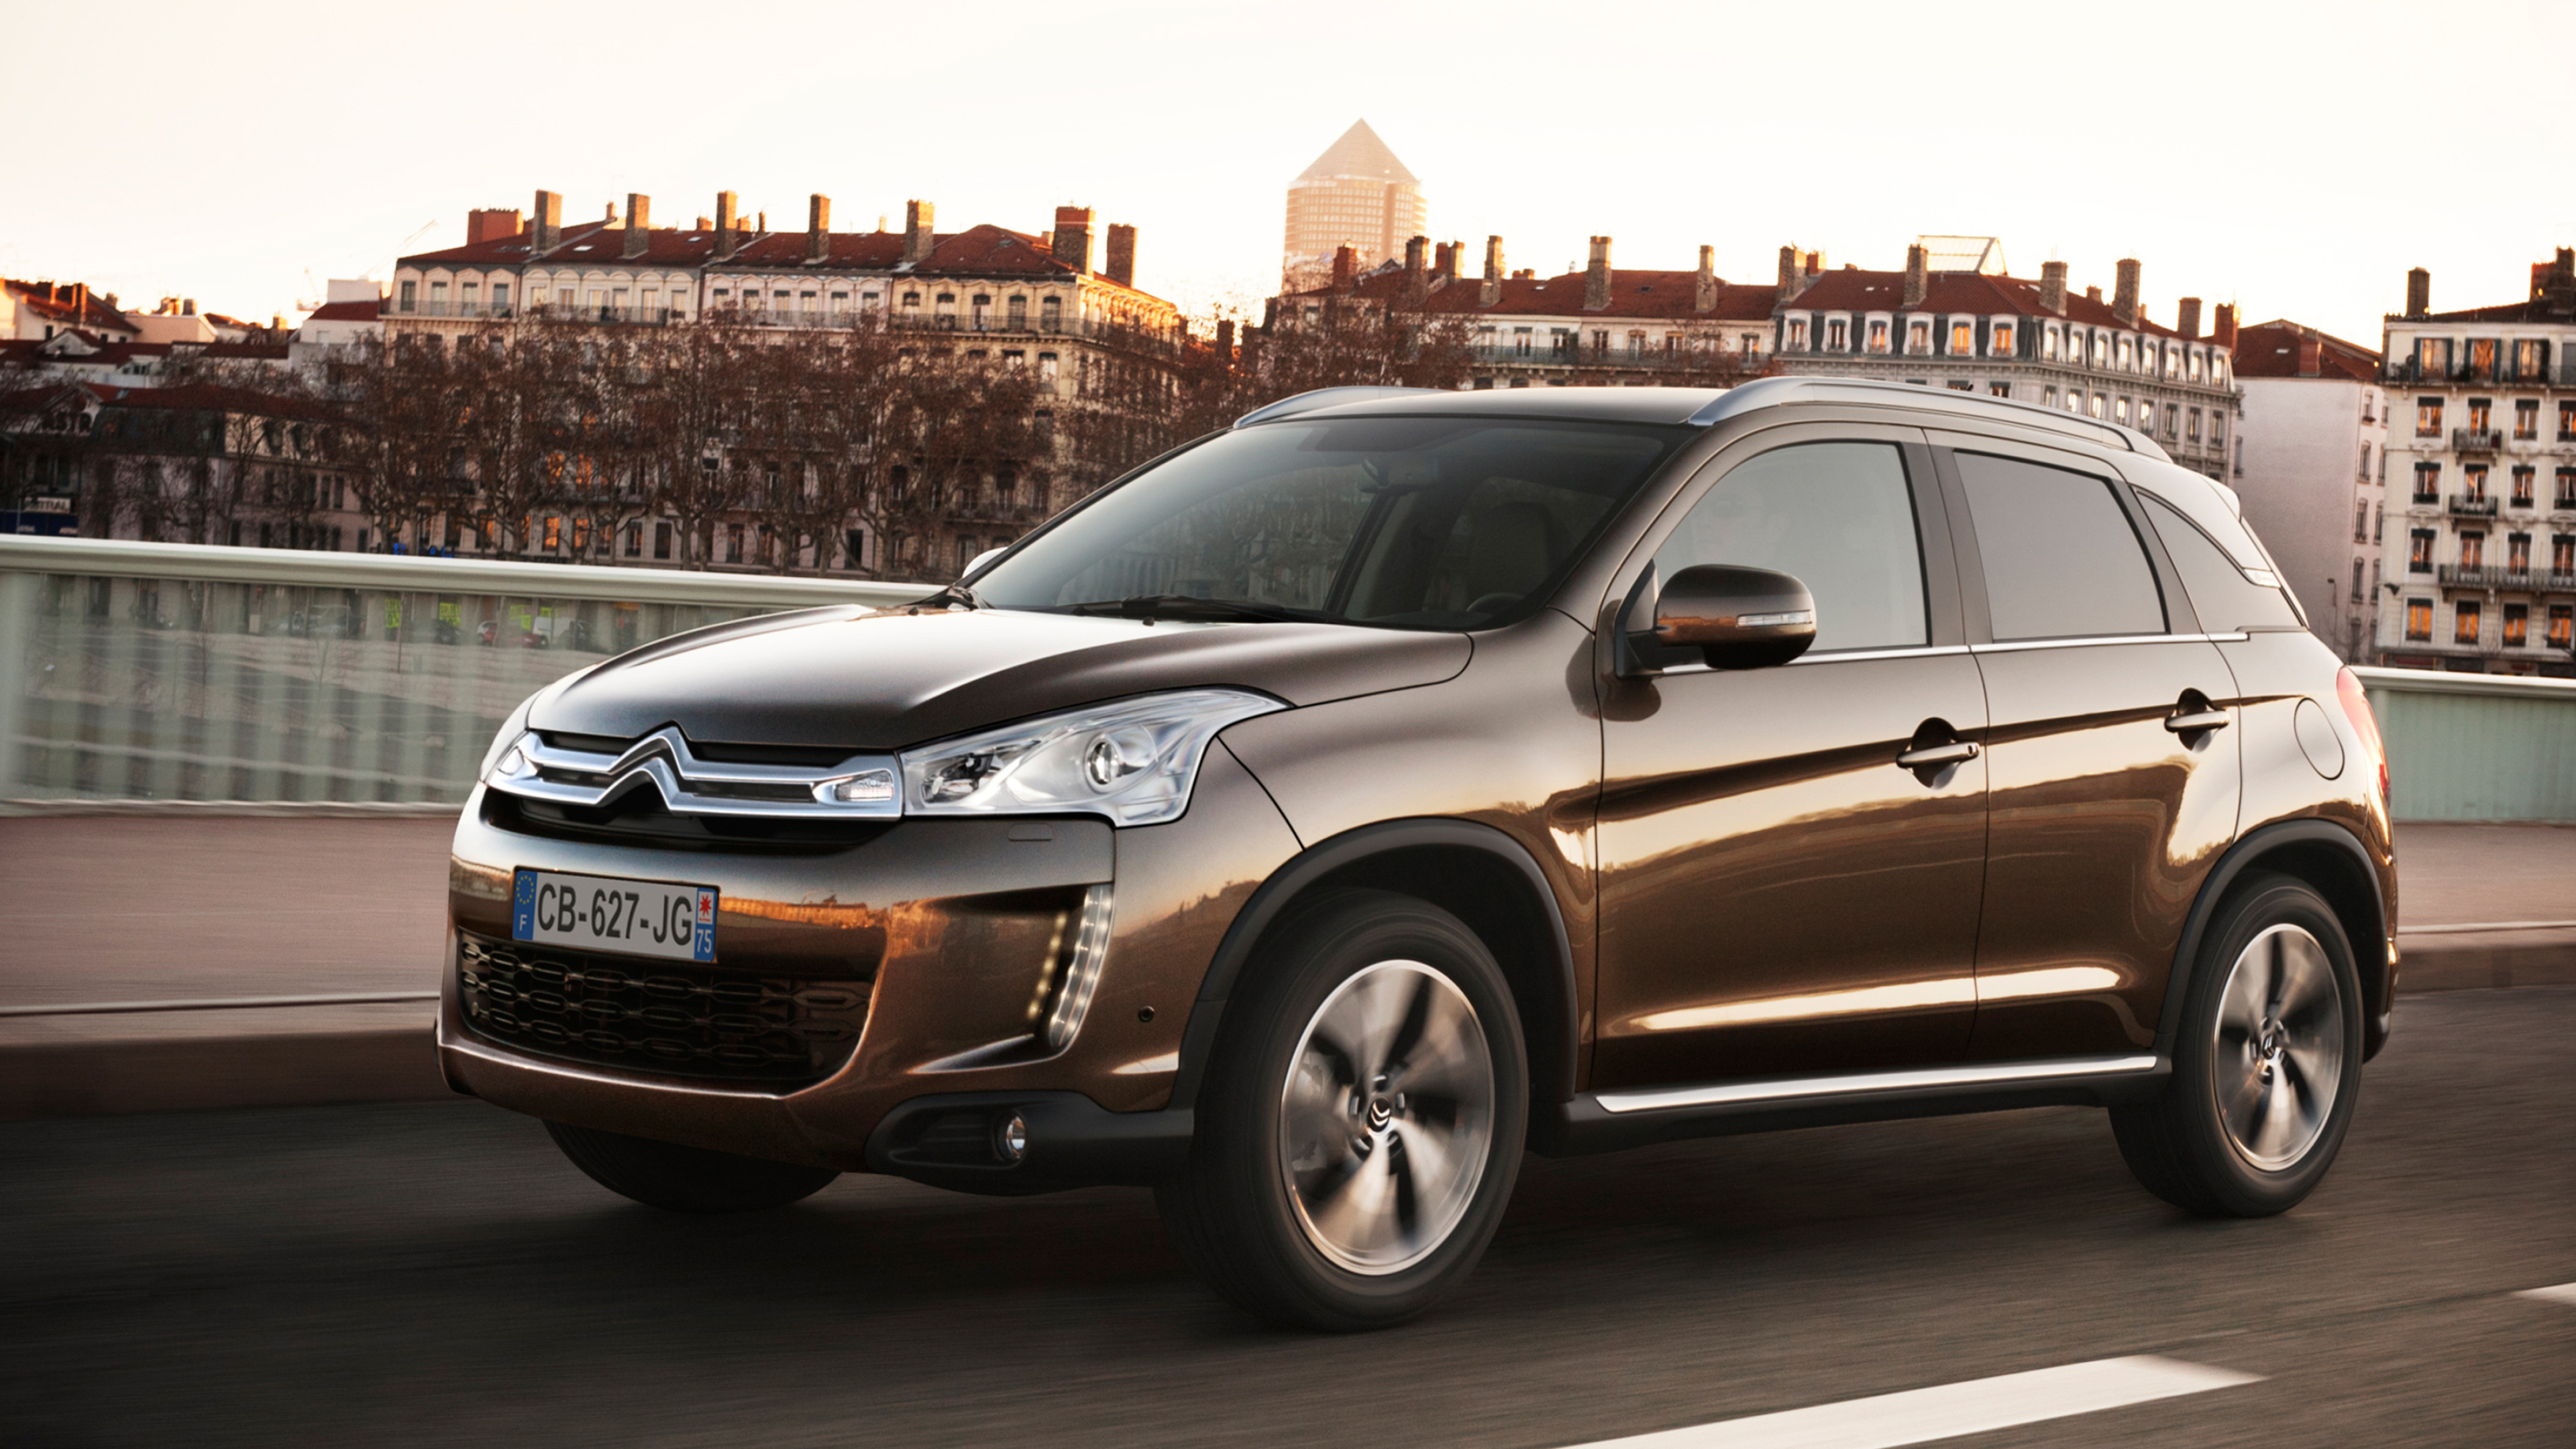 Citroen C4 Aircross, Compact SUV, Stylish and versatile, Unforgettable driving experience, 3840x2160 4K Desktop